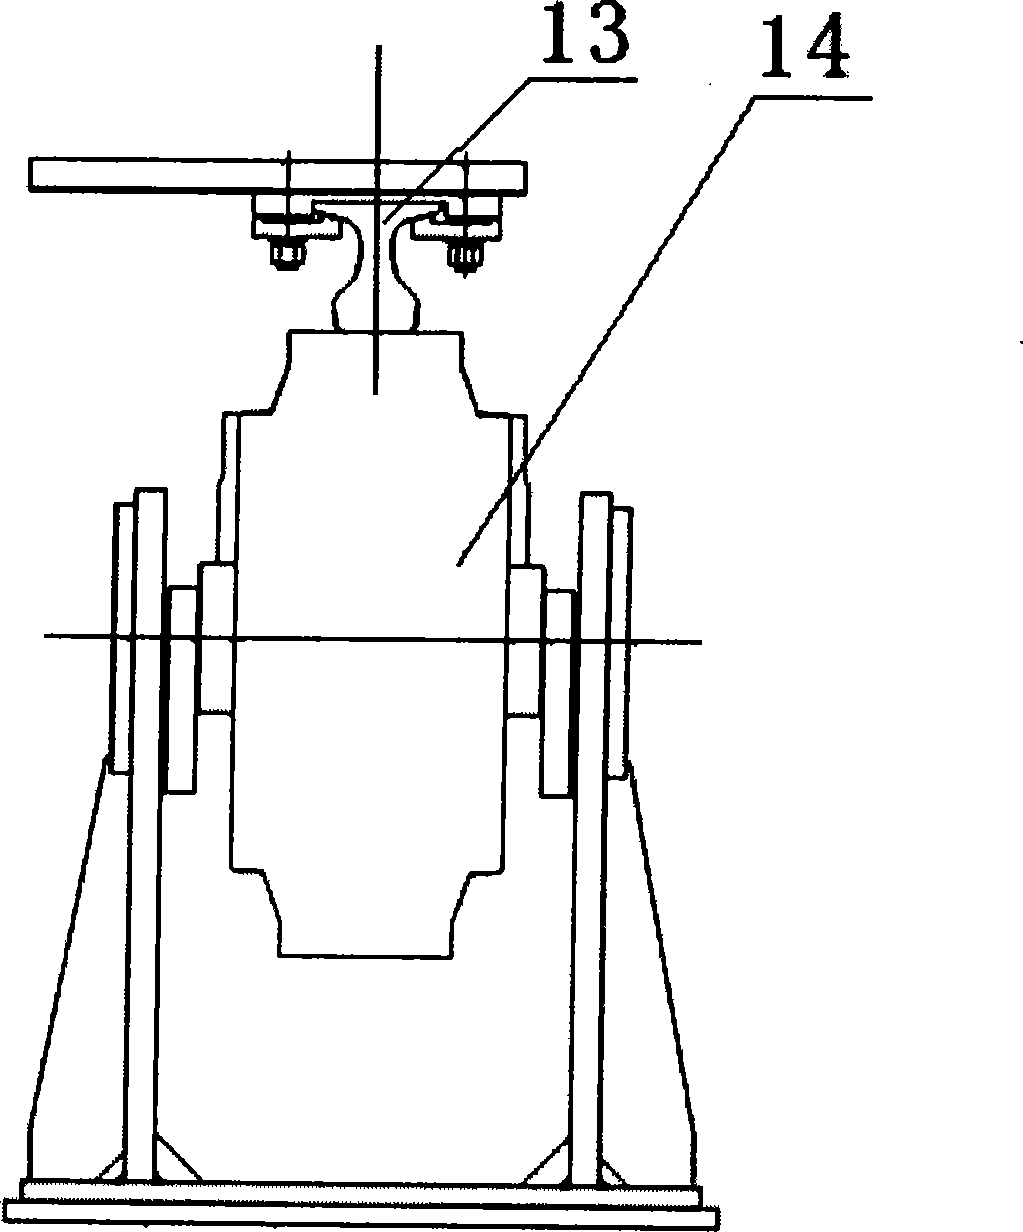 Four-fulcrum double-vehicle tipping apparatus